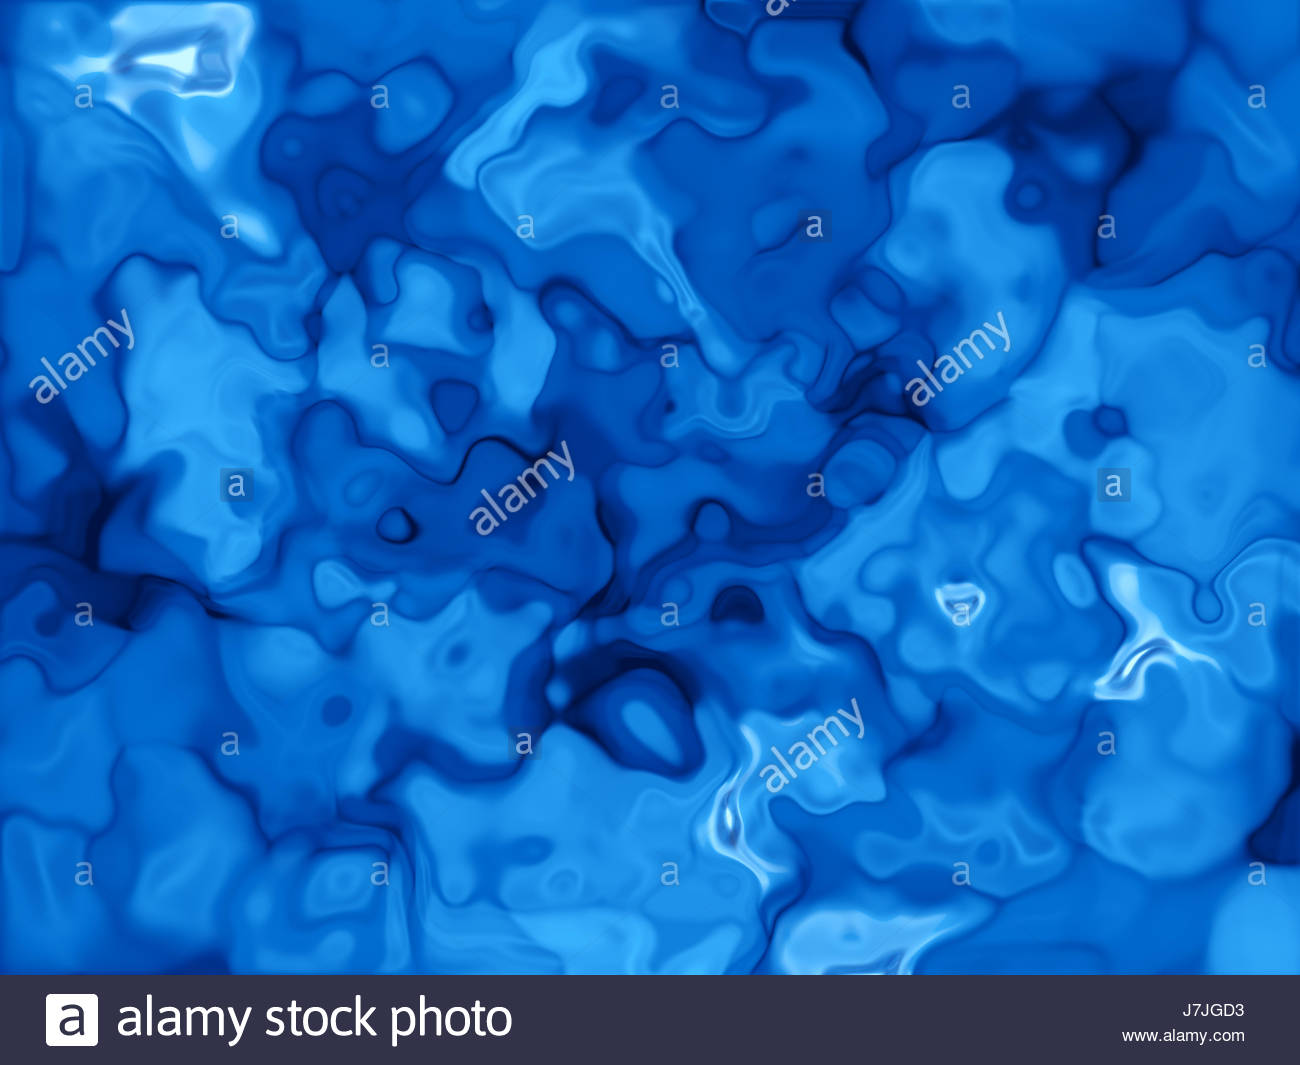 Abstract Liquid Background In Blue Stock Photo